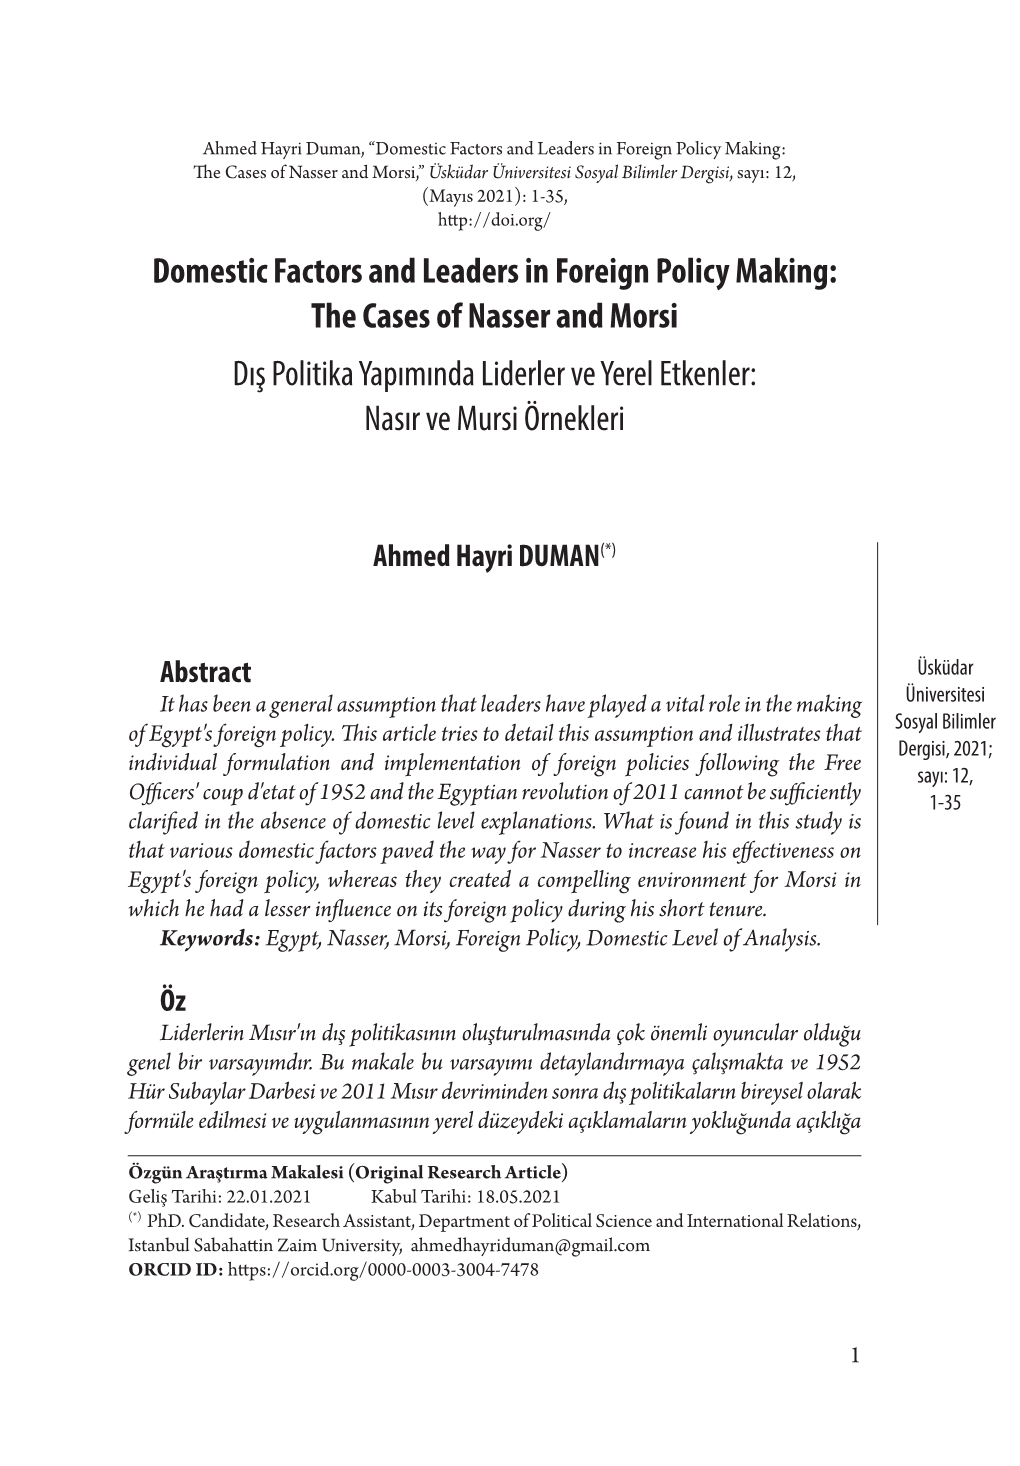 Domestic Factors and Leaders in Foreign Policy Making: the Cases